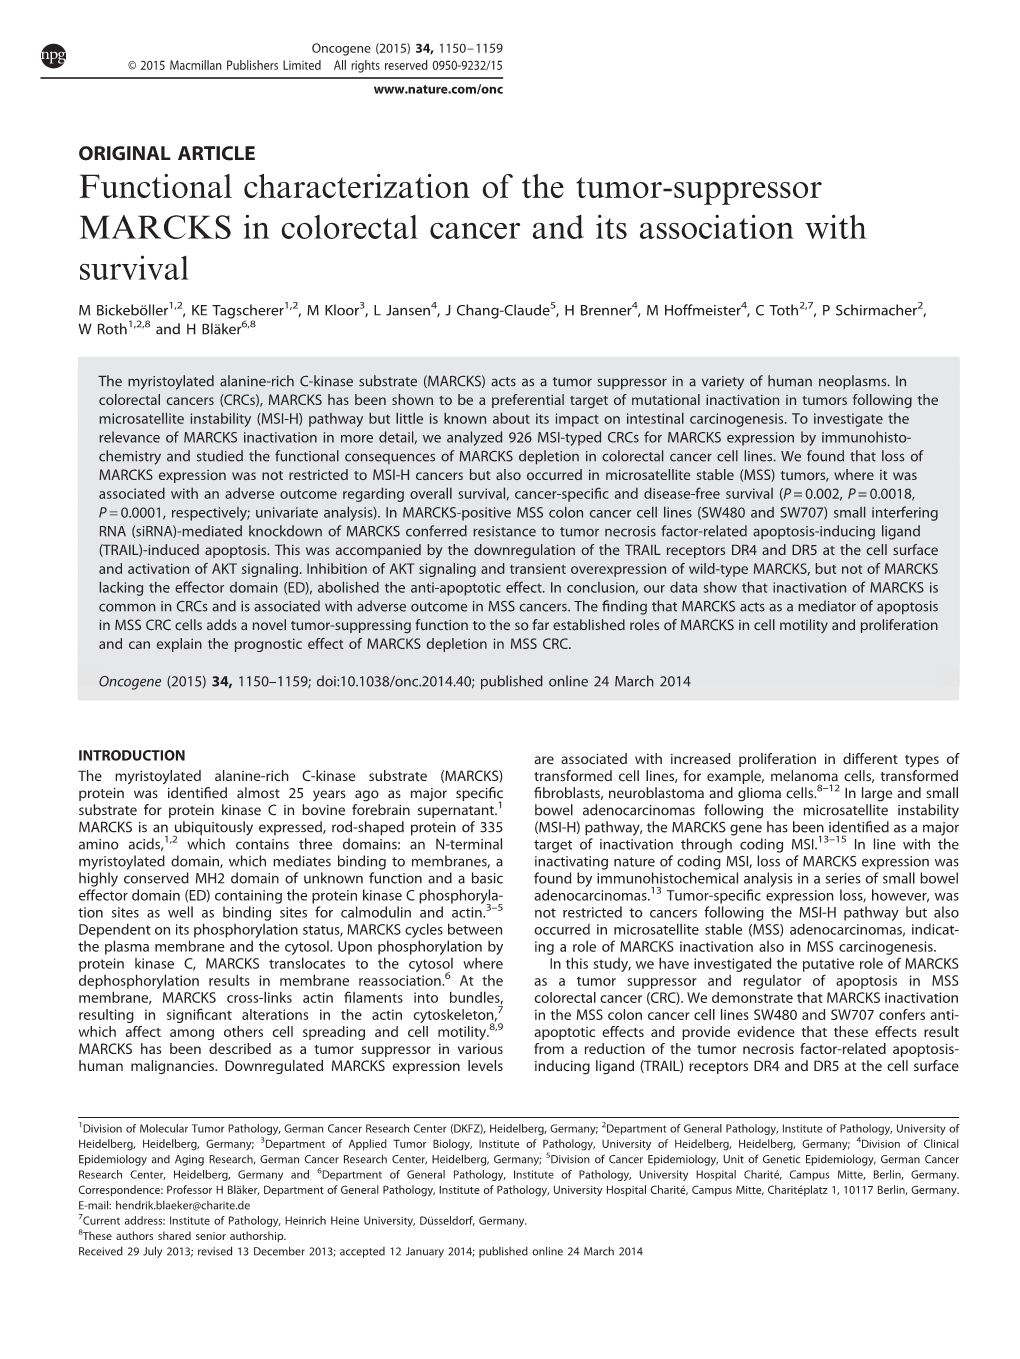 Functional Characterization of the Tumor-Suppressor MARCKS in Colorectal Cancer and Its Association with Survival